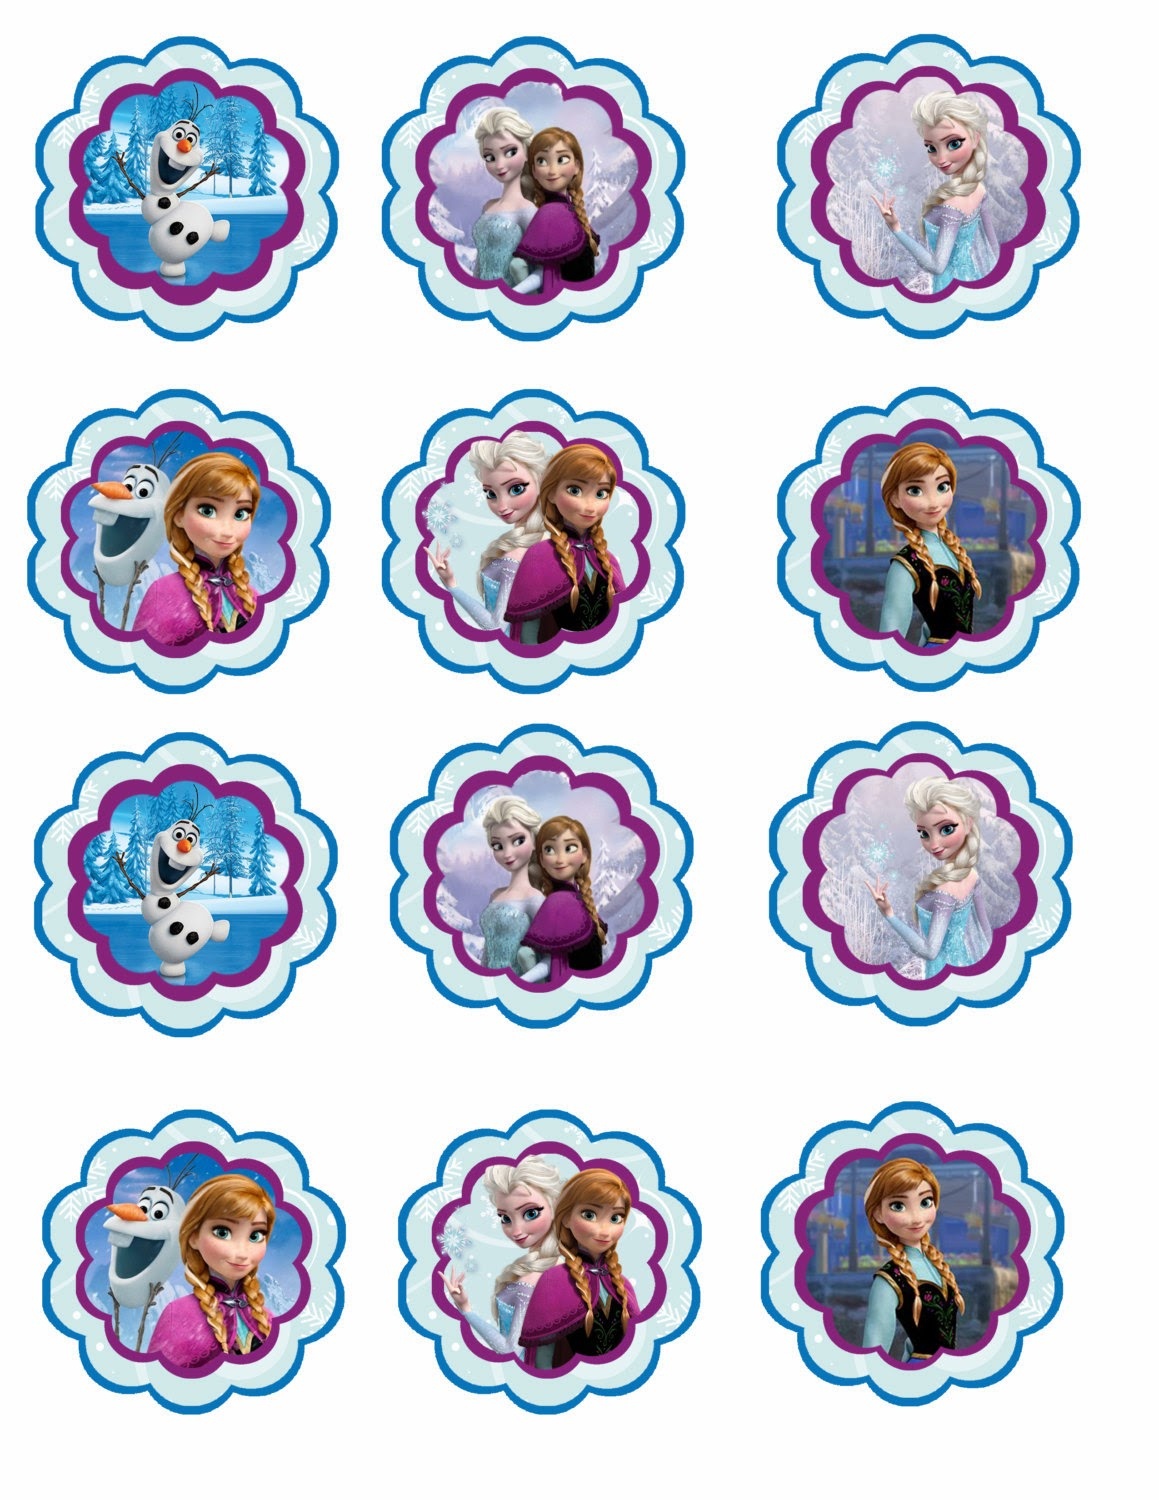 Frozen: Free Printable Toppers. - Oh My Fiesta! In English - Free Printable Barbie Cupcake Toppers